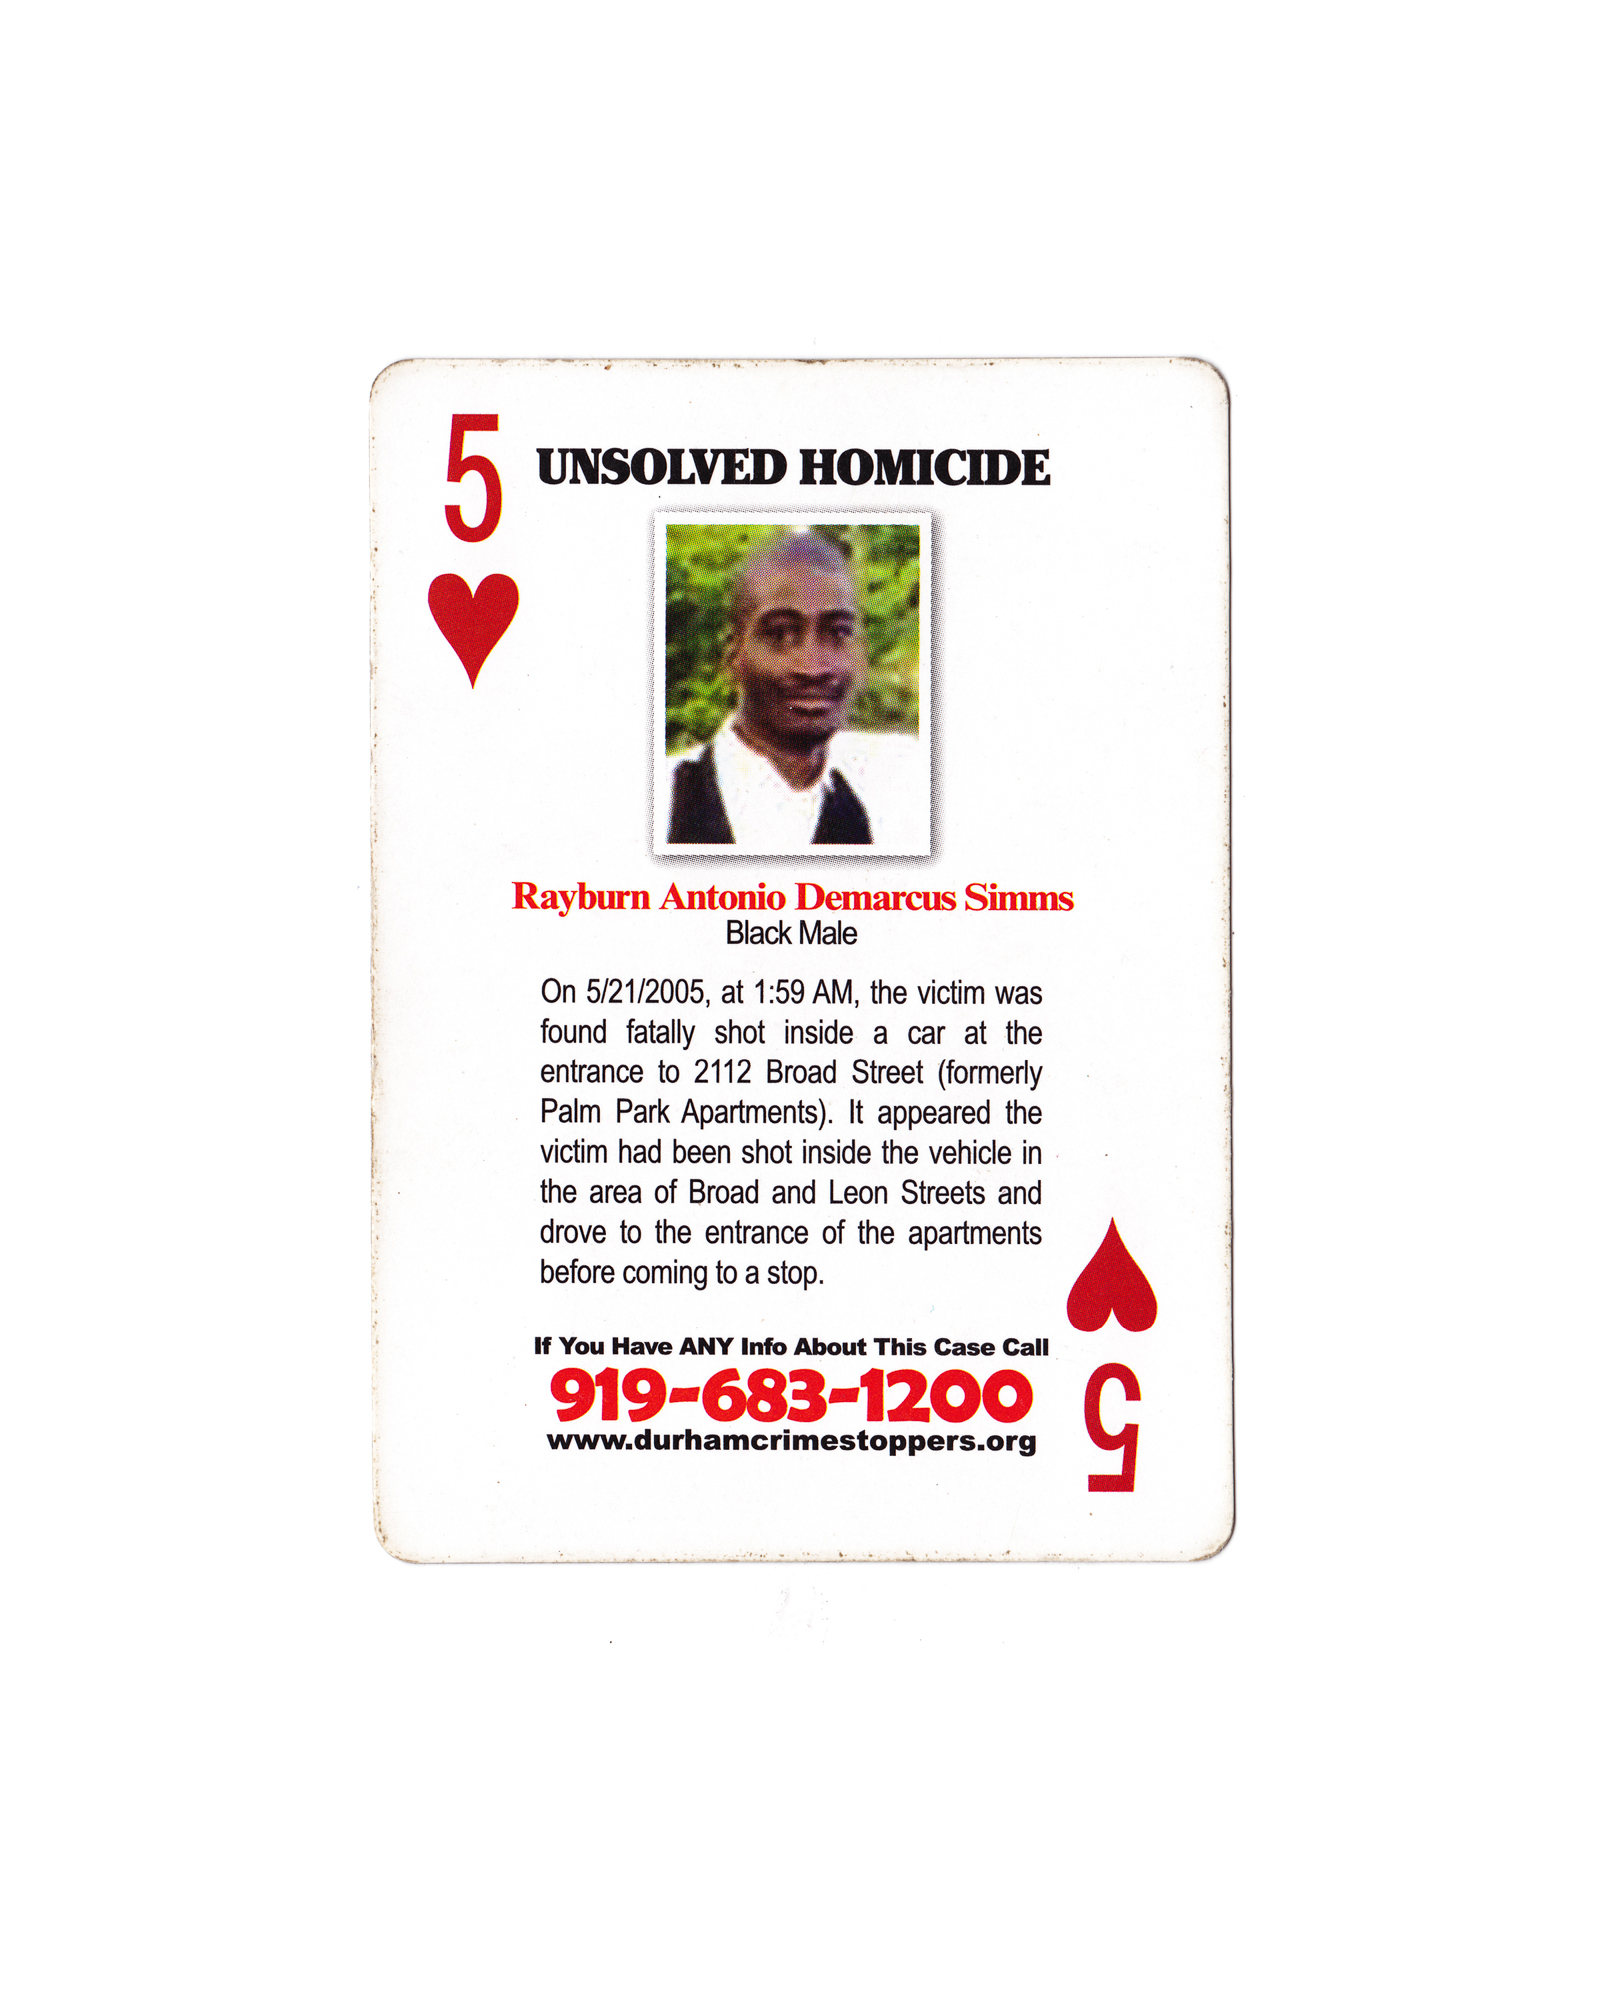  Rayburn Antonio Demarcus Simms is featured among 51 other unsolved Durham homicides in a deck of playing cards designed to generate leads in cold murder cases. According to Durham Police, there are more than 150 unsolved homicides in Durham stretchi